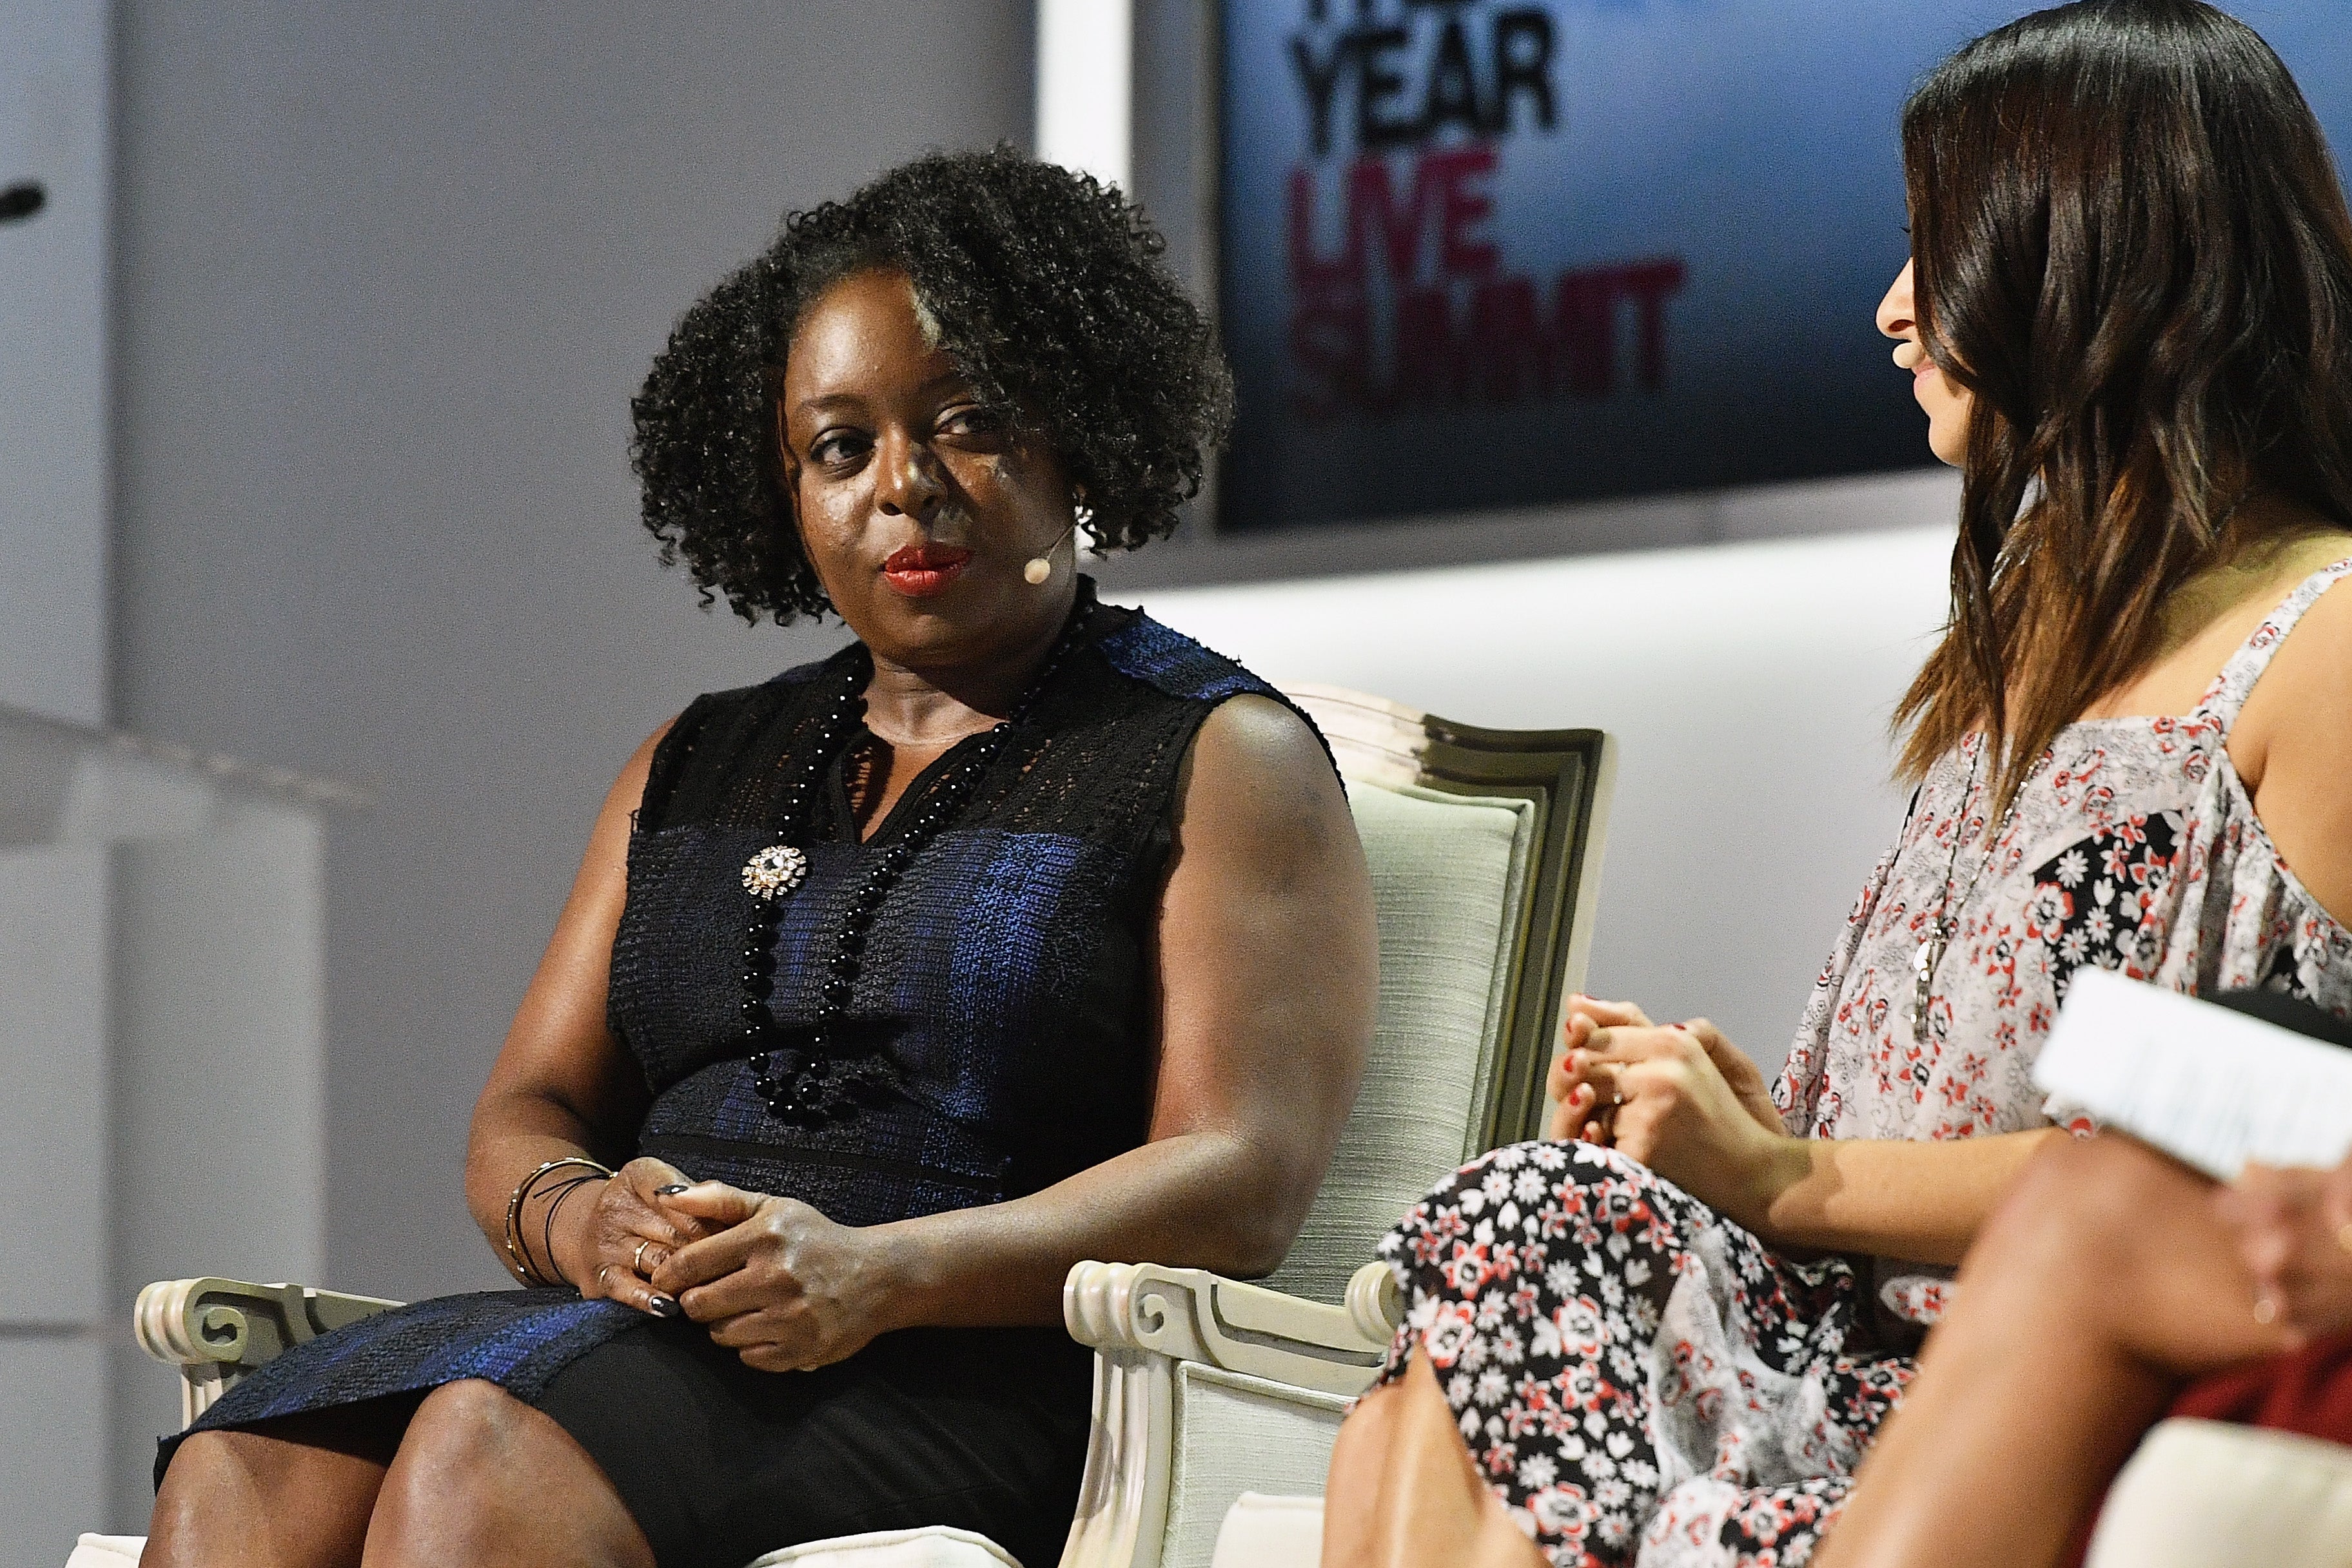 Kimberly Bryant has helped 80,000 women and girls make a start in the tech industry